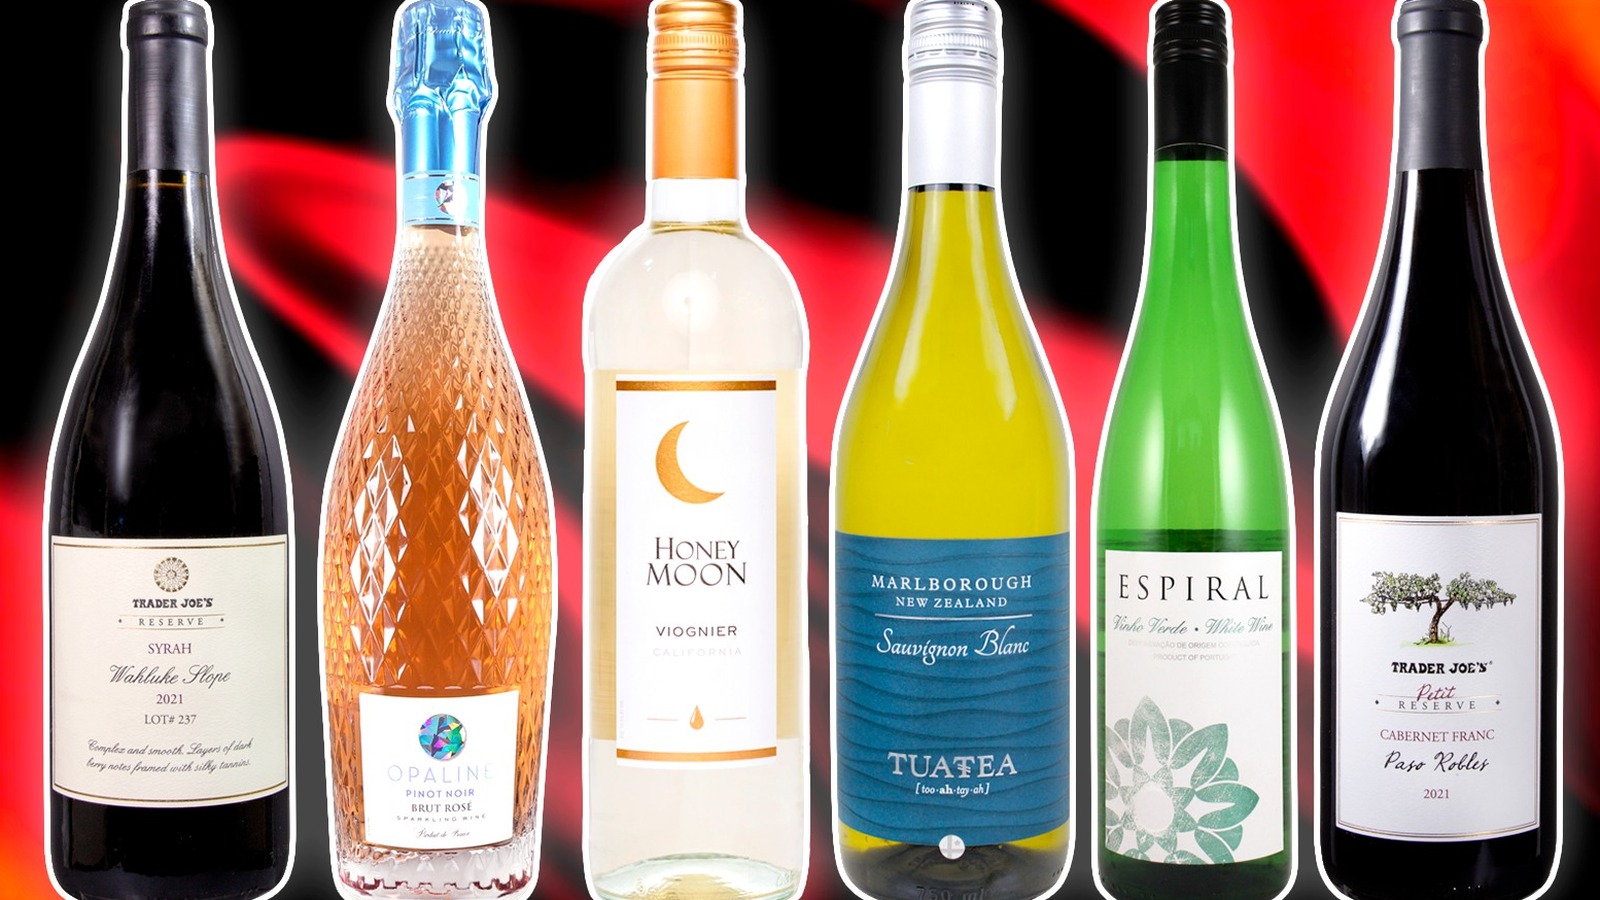 Popular, Easy-Drinking Wines from 14 Hands